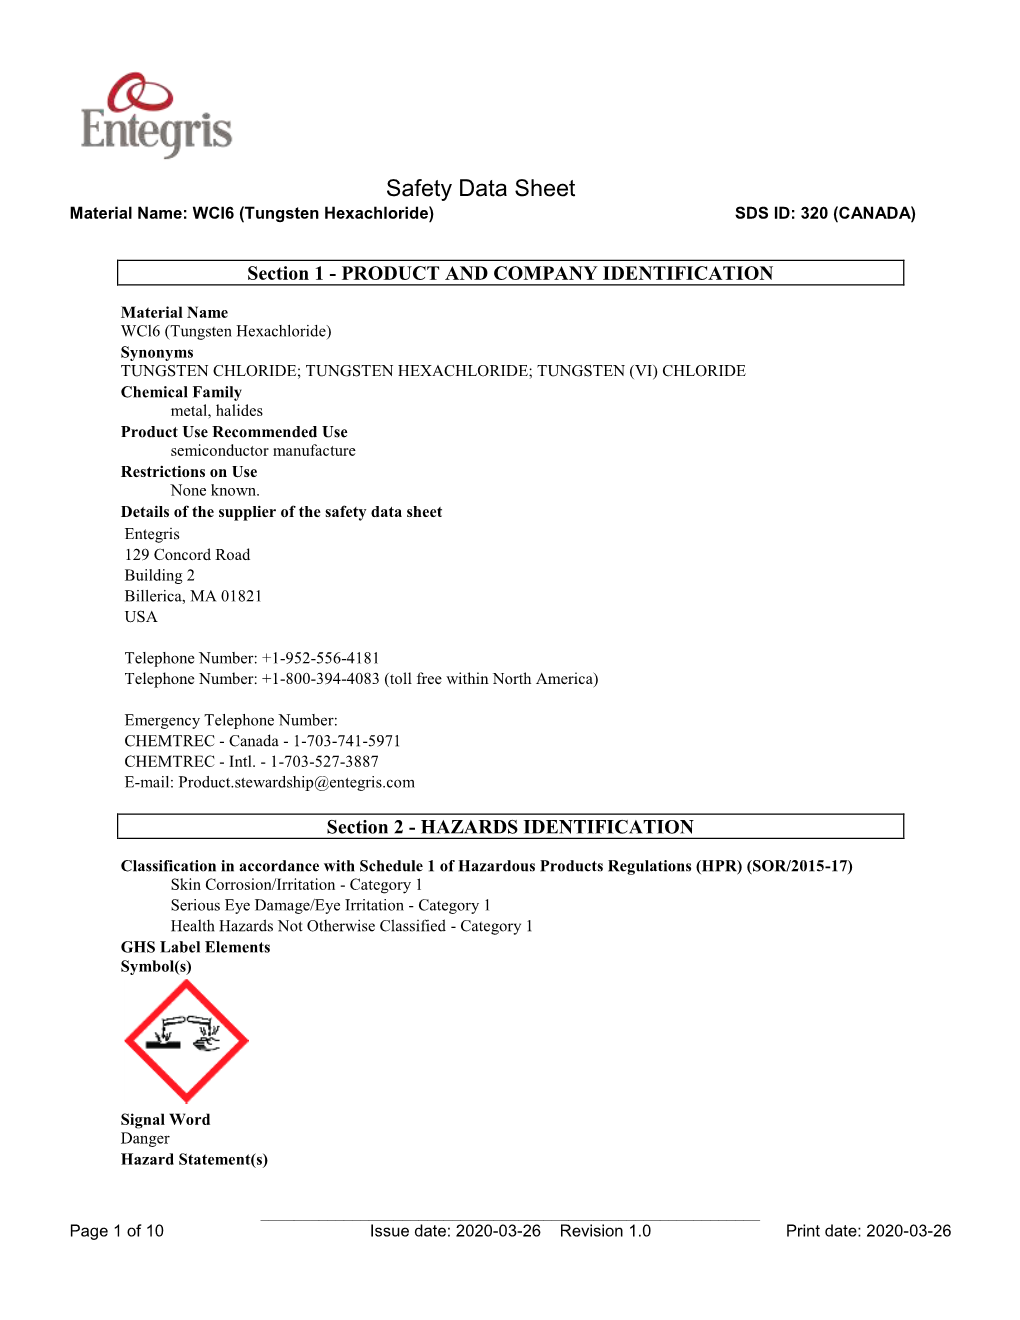 Safety Data Sheet Material Name: Wcl6 (Tungsten Hexachloride) SDS ID: 320 (CANADA)